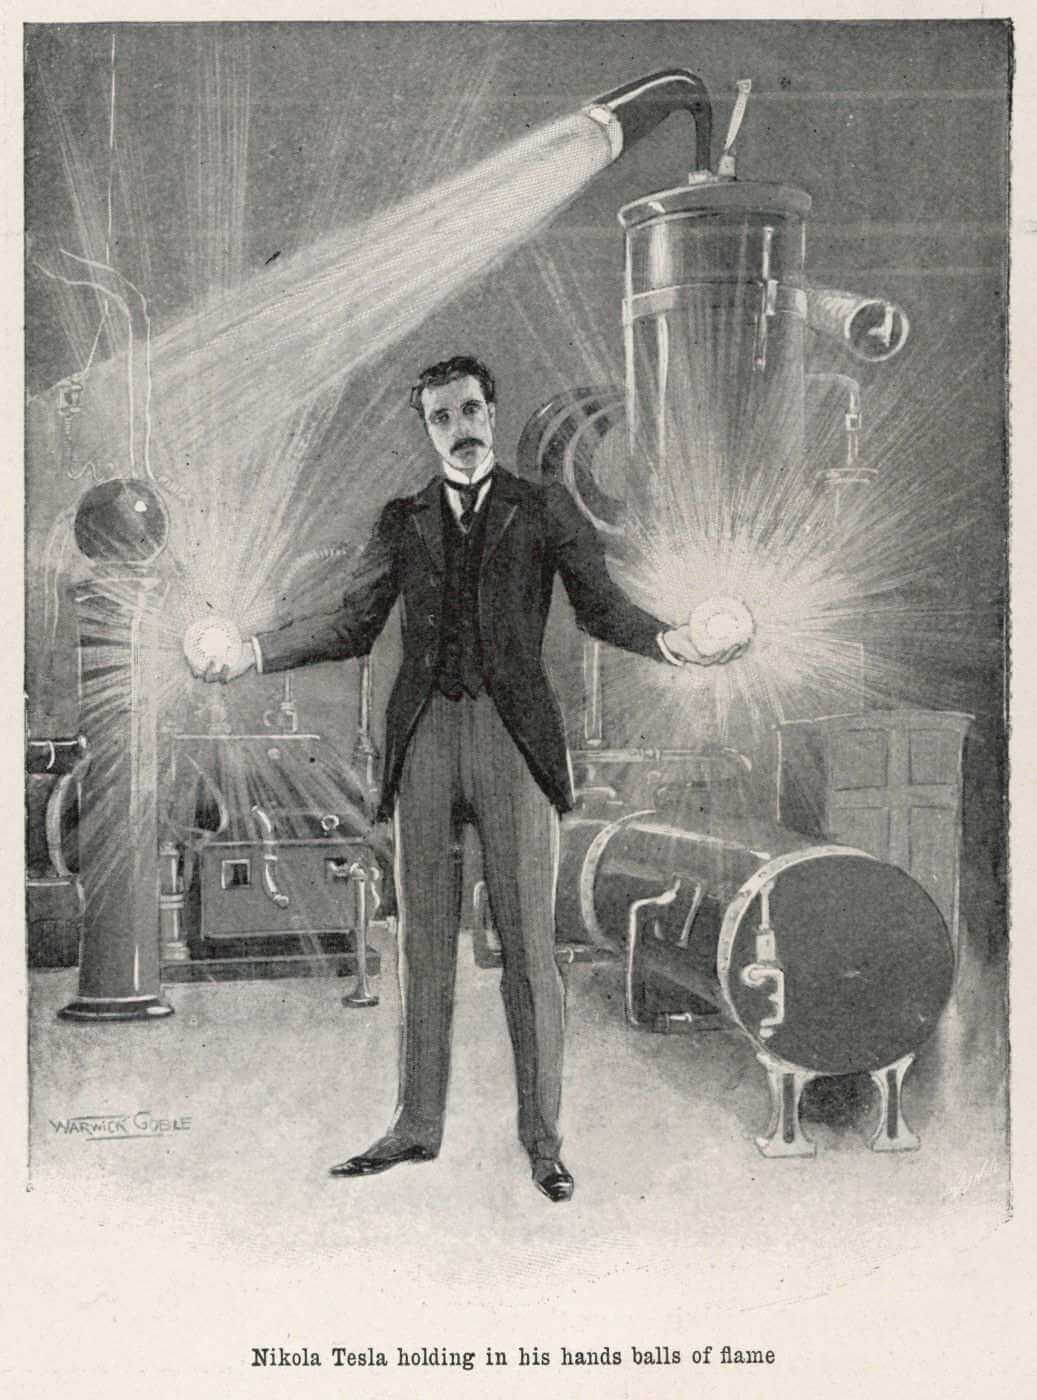 Did Project Pegasus harness Nikola Tesla’s discoveries to make time travel possible? © Image Credit: Wikimedia Commons